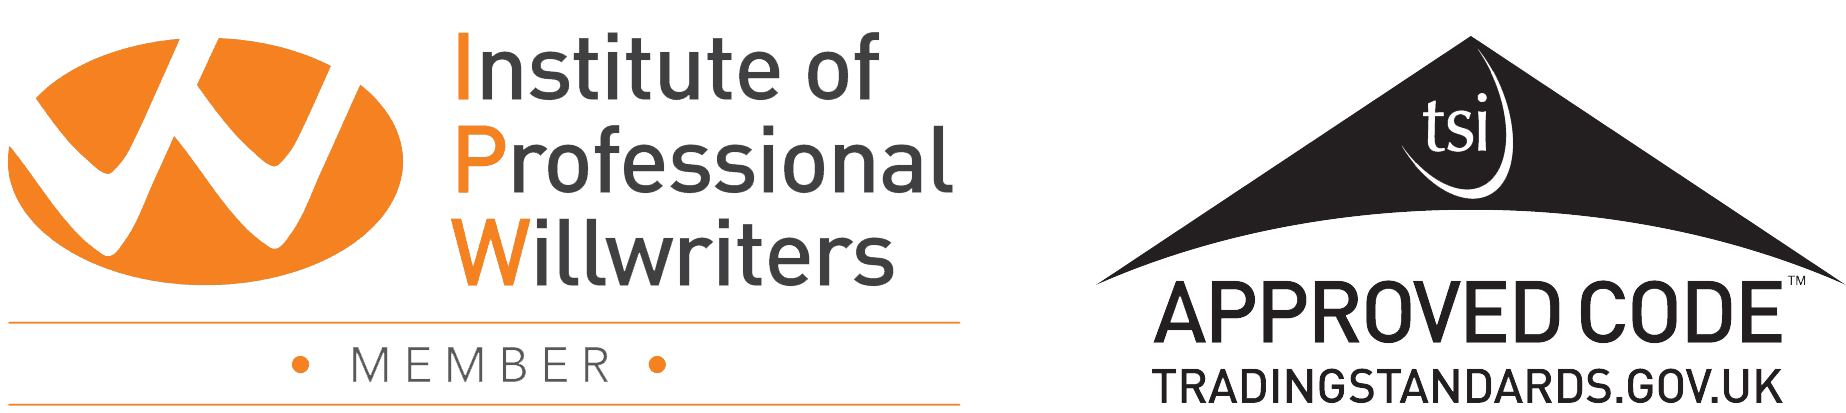 Institute of Professional Willwriters and Trading Standards